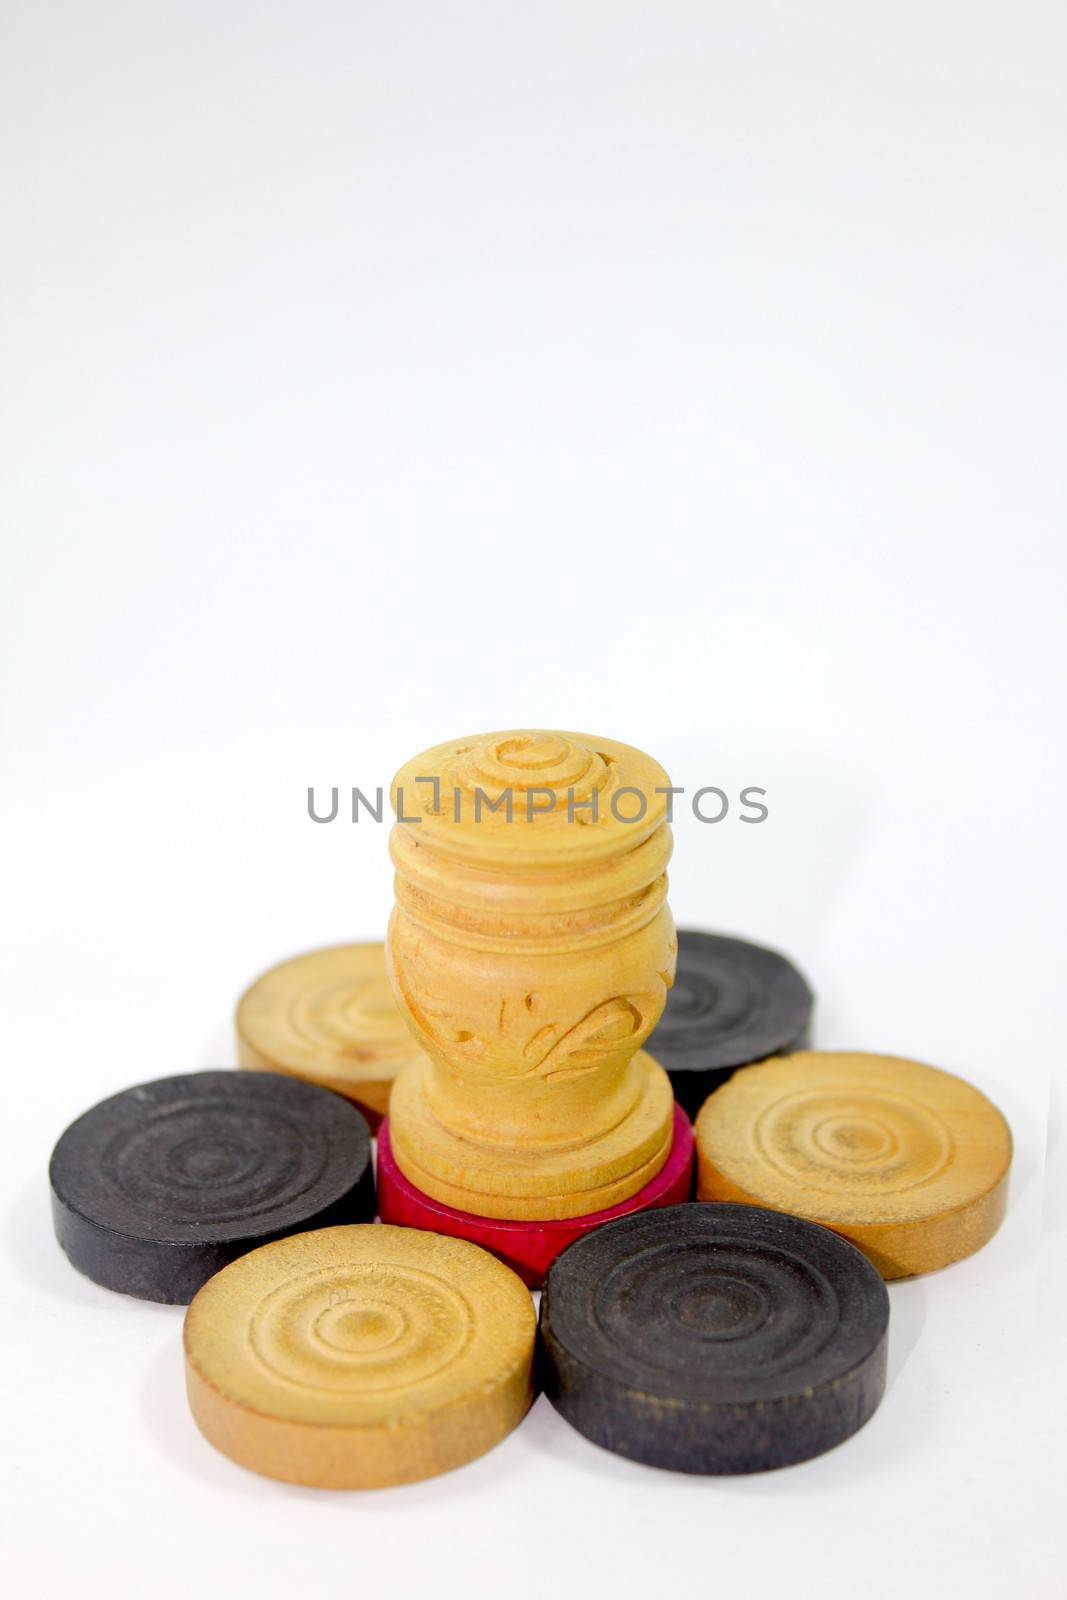 carrom coins with wooden object